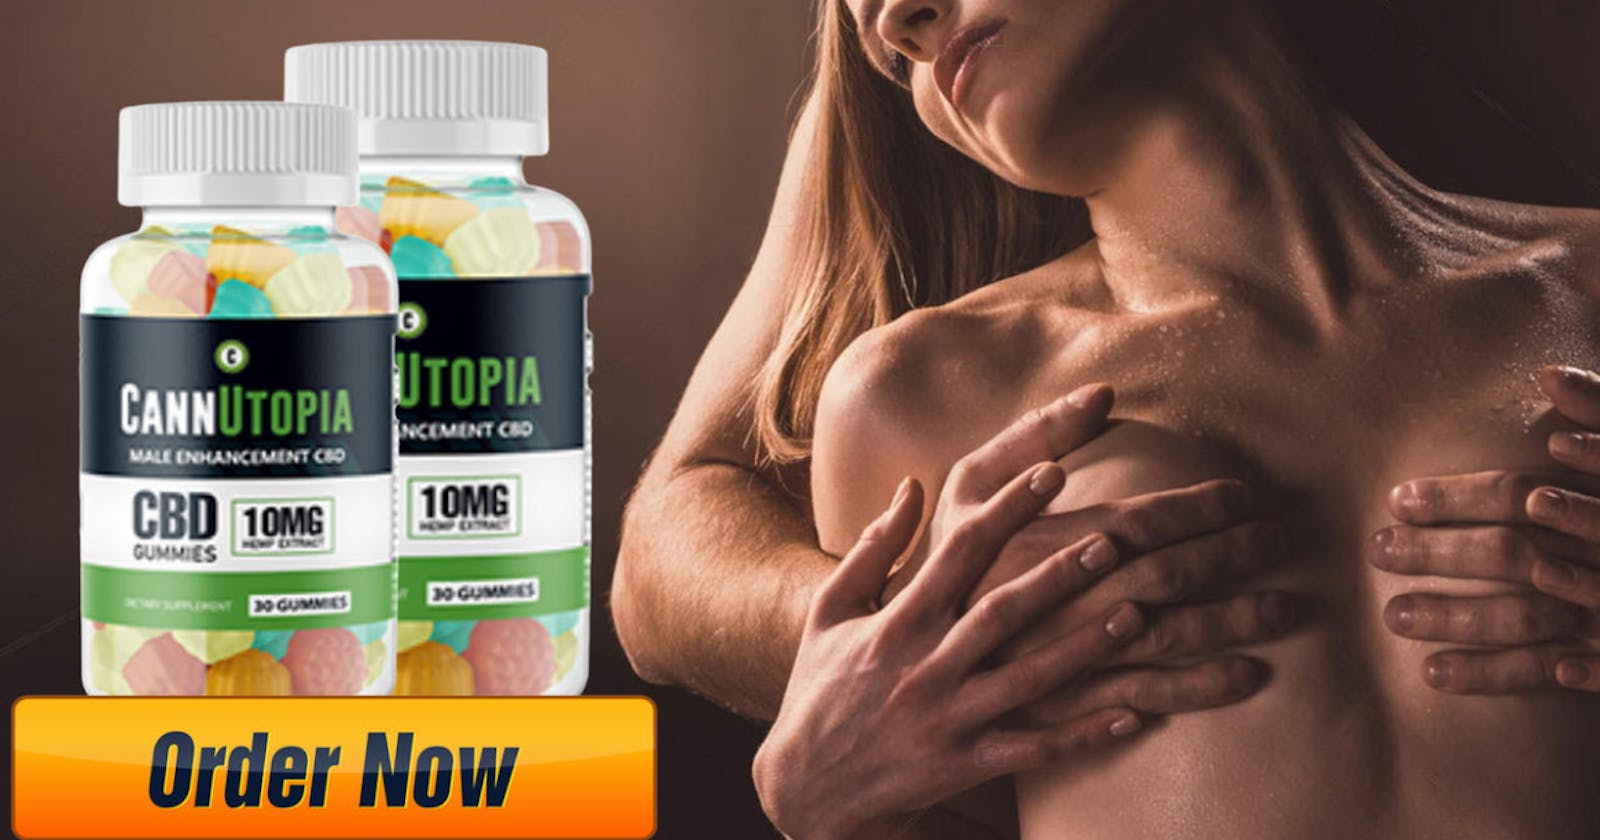 Cannutopia Male Enhancement For Sex Becoming So Popular?